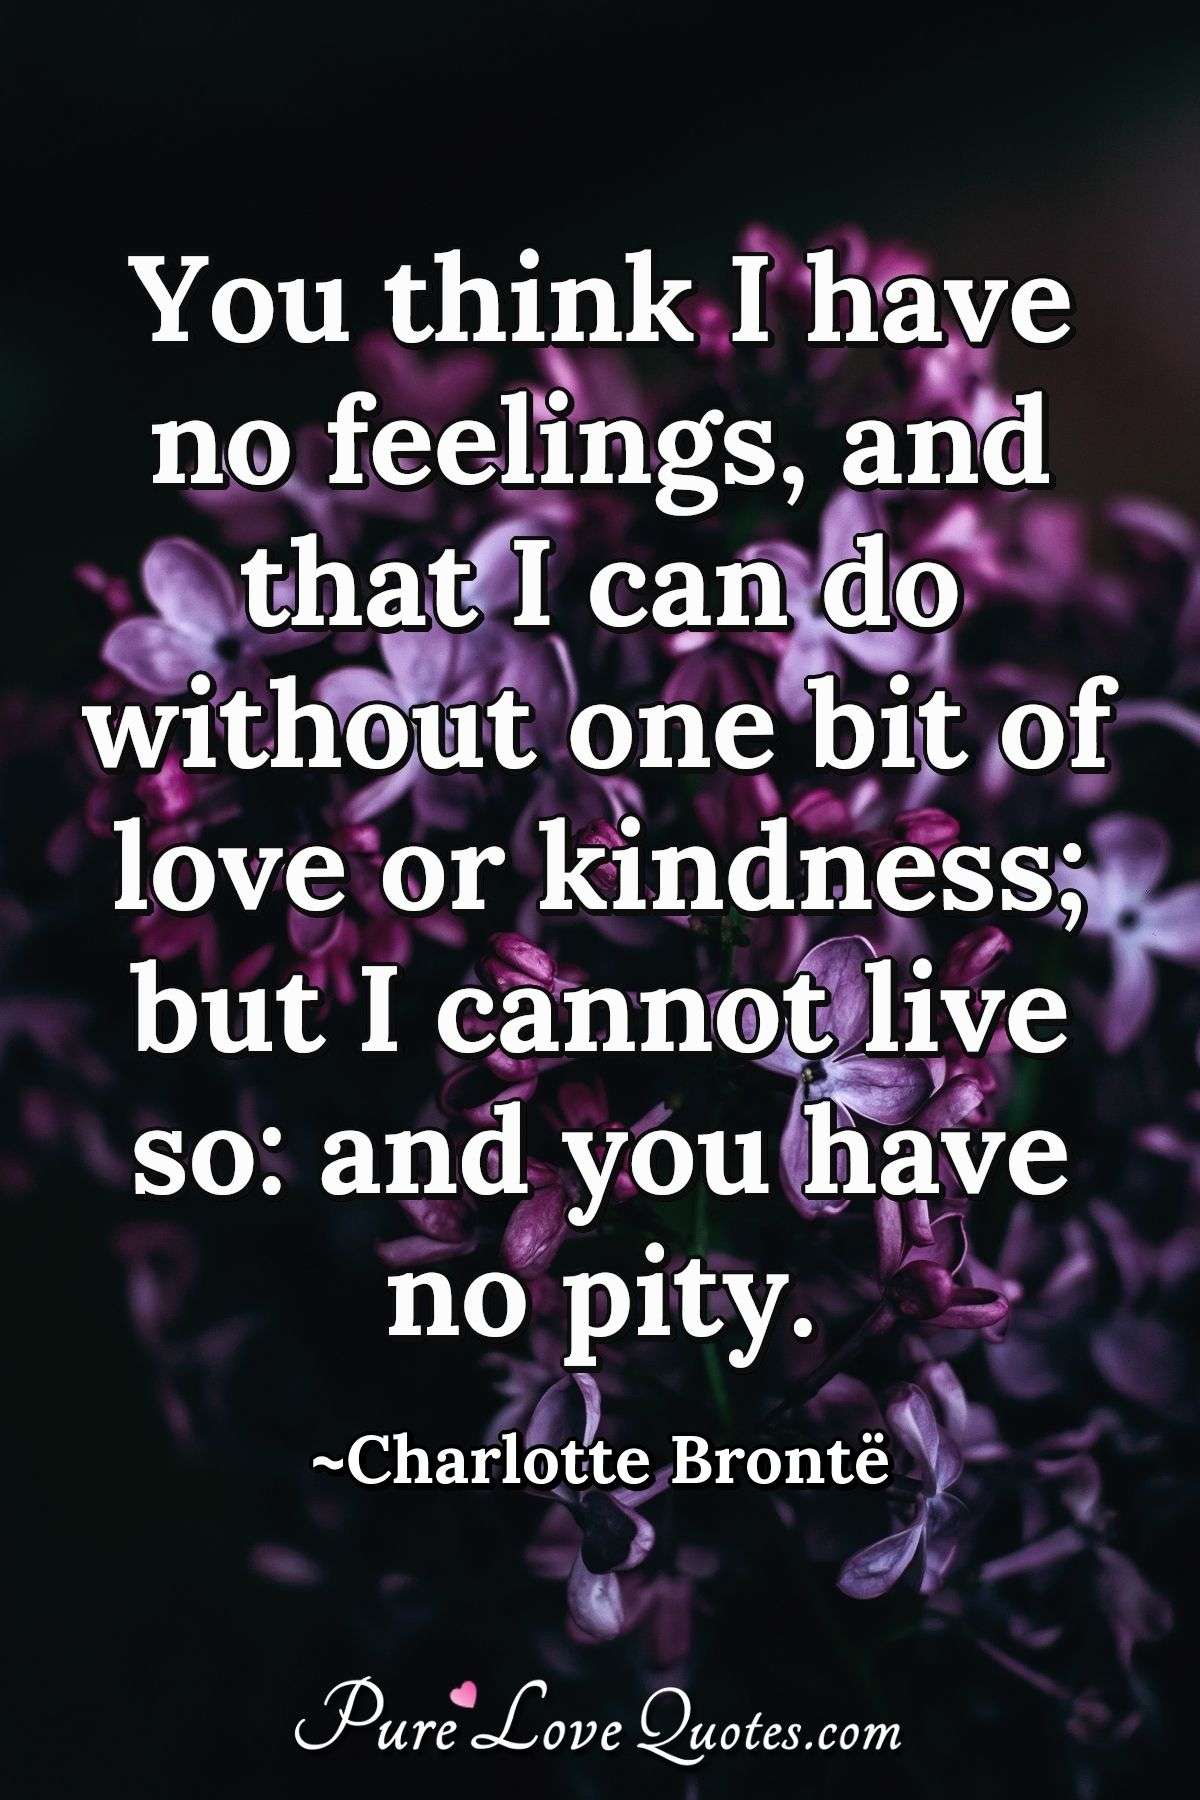 You think I have no feelings, and that I can do without one bit of love or kindness; but I cannot live so: and you have no pity. - Charlotte Brontë